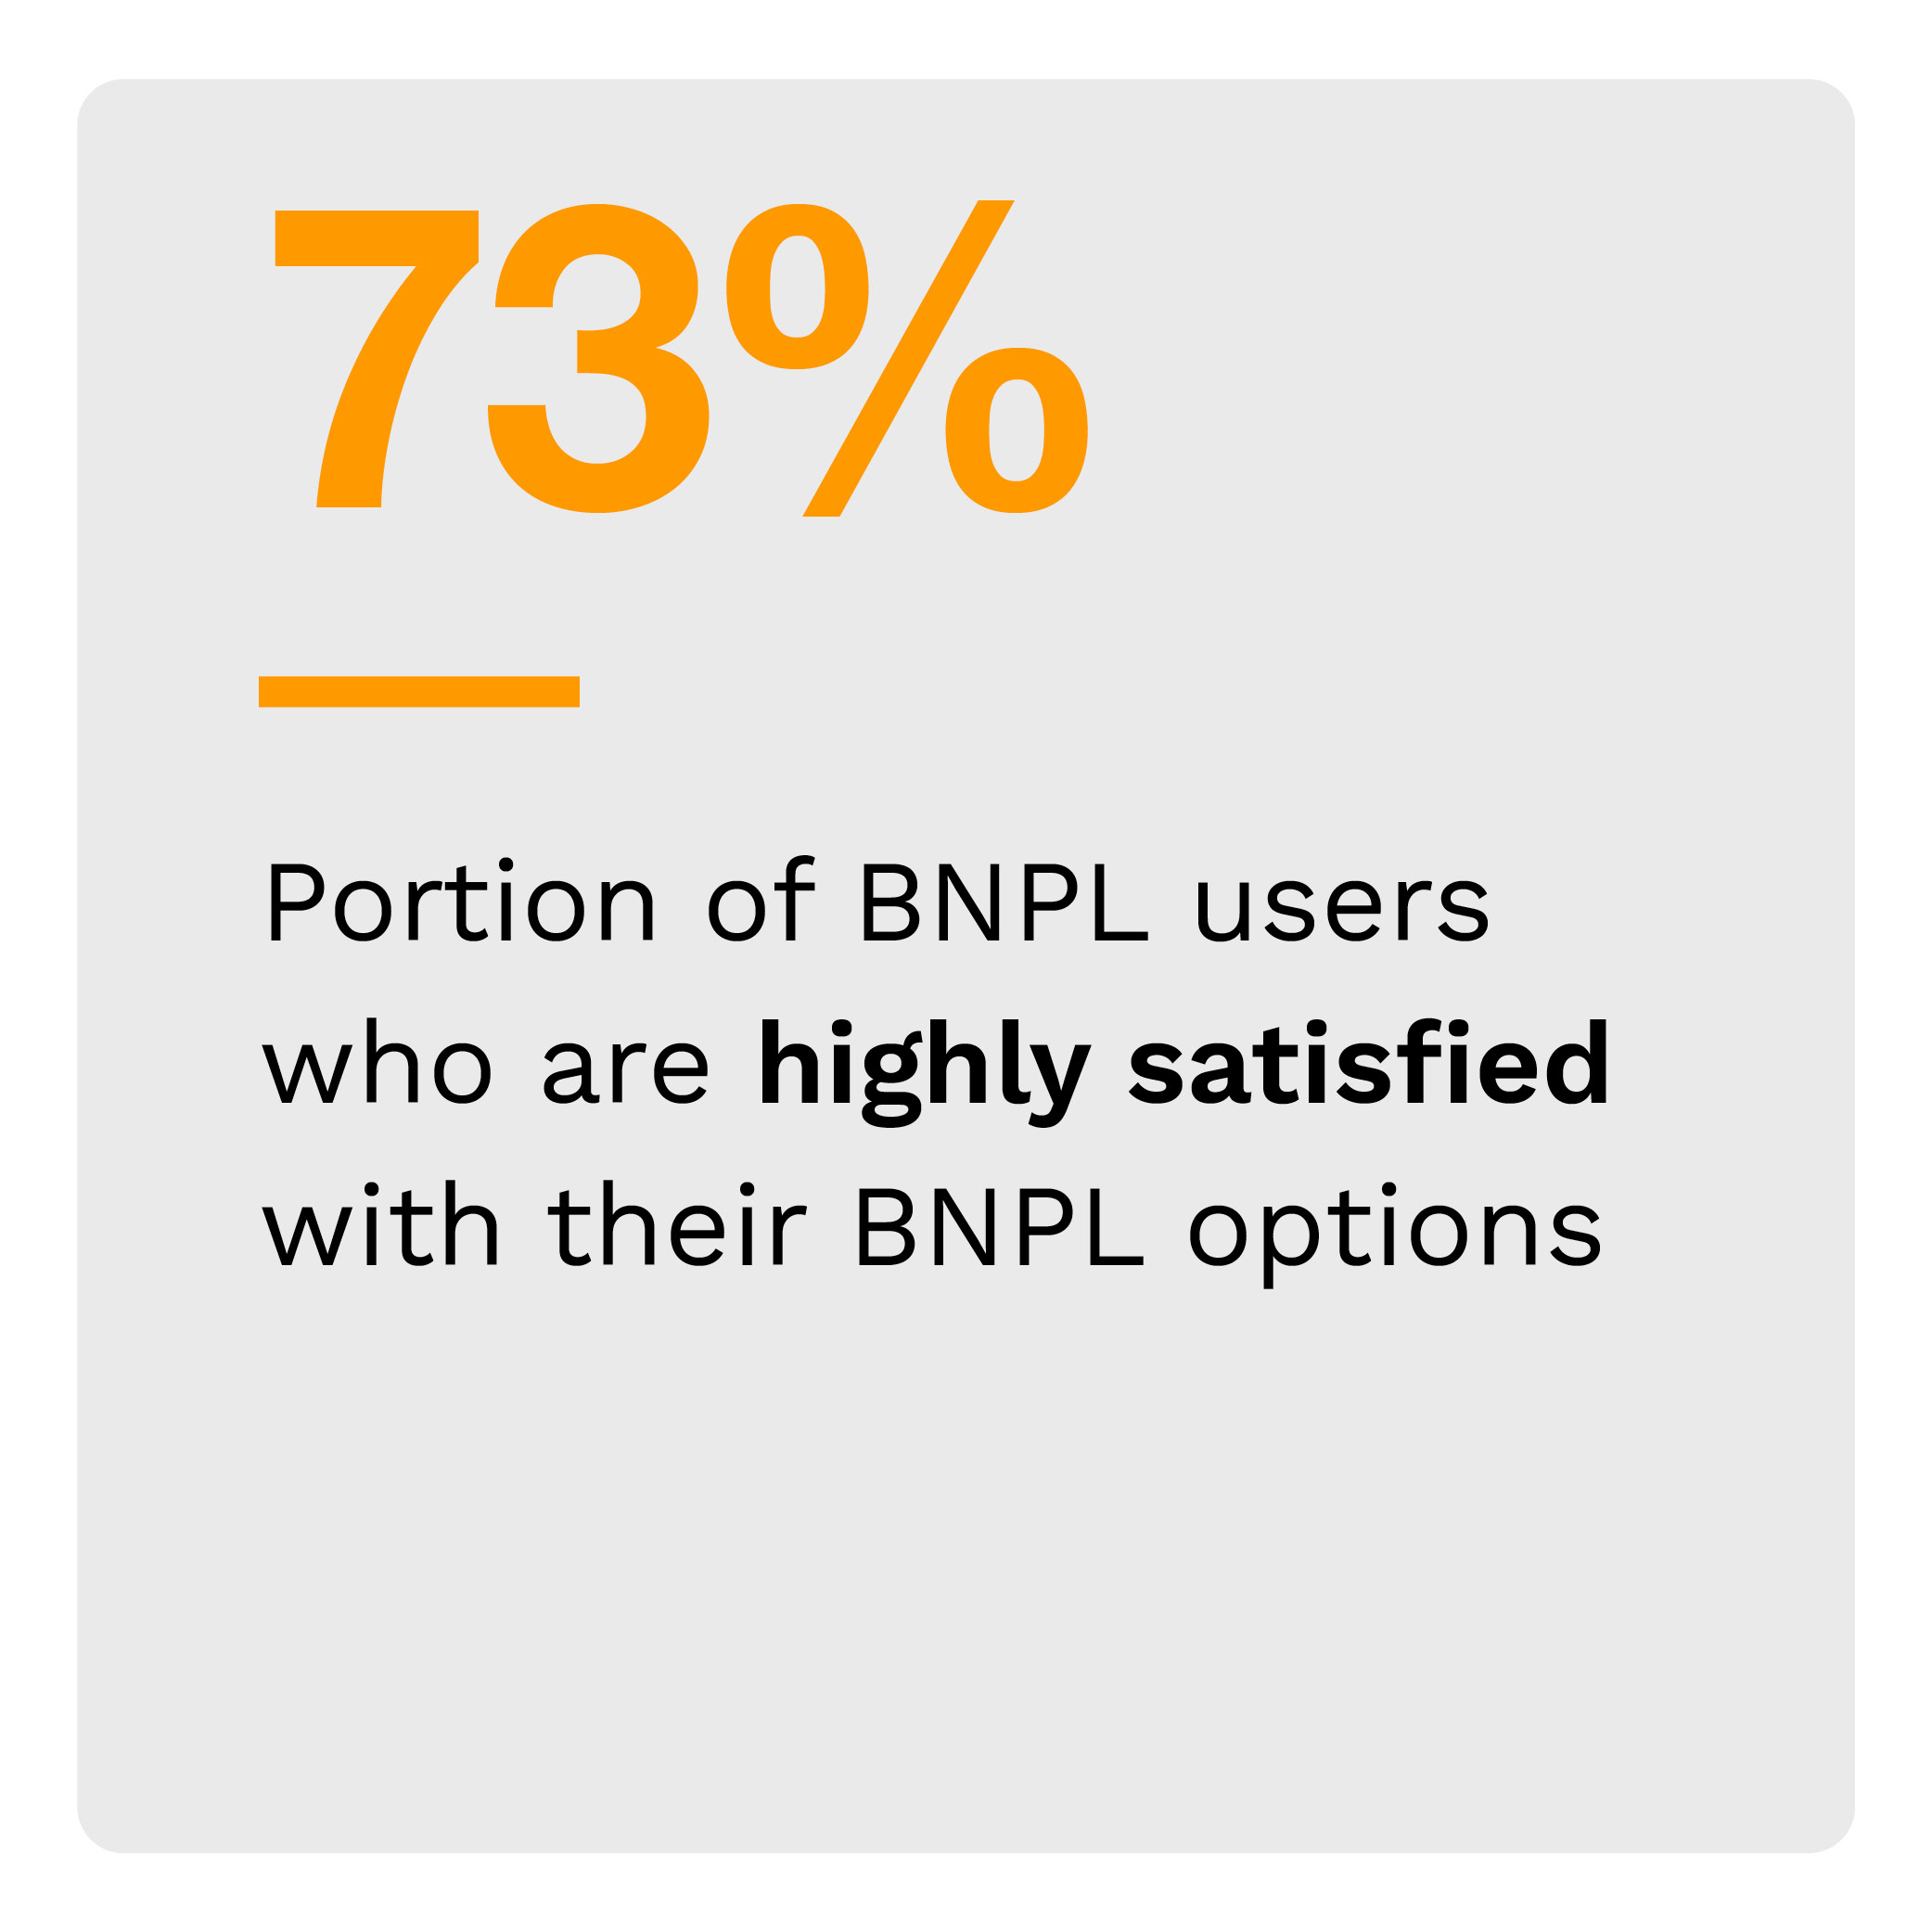 73%: Portion of BNPL users who are highly satisfied with their BNPL options